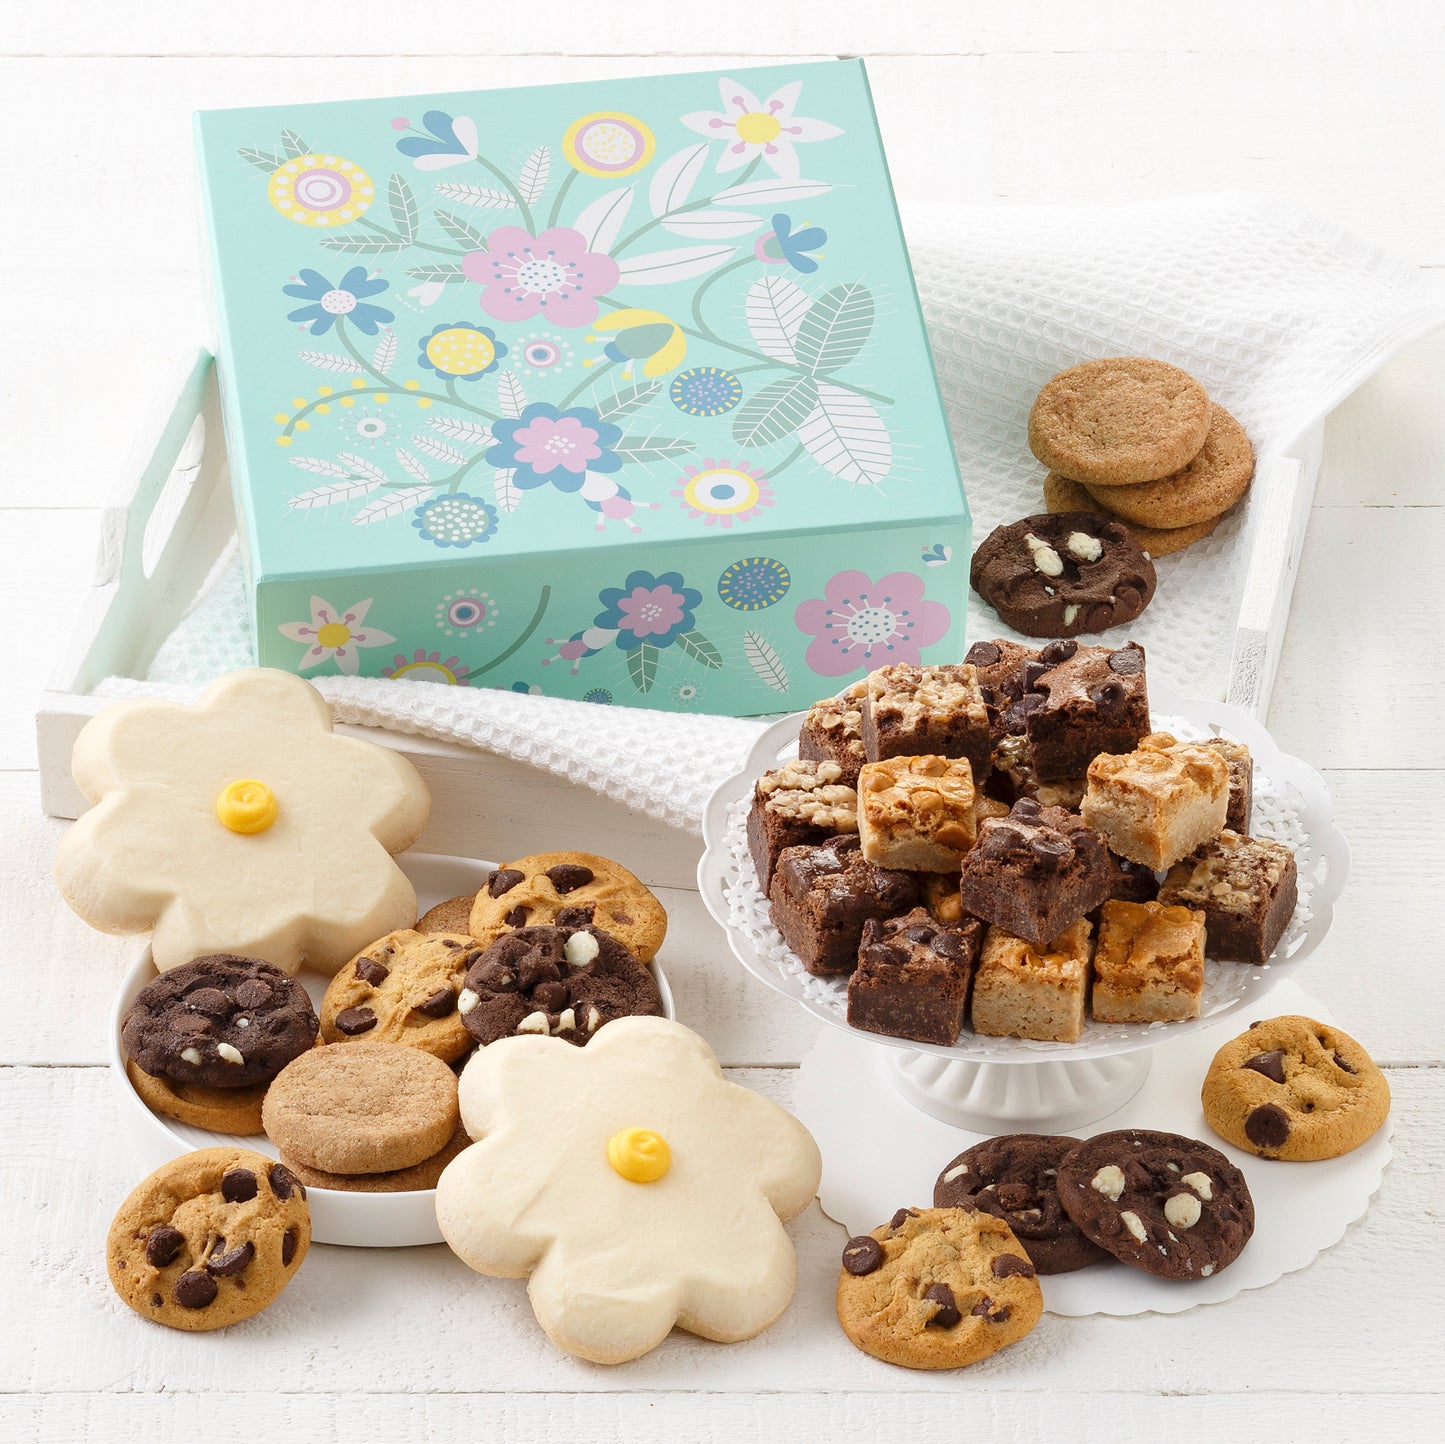 A light blue gift box decorated with flowers and surrounded by an assortment of nibblers, brownie bites, and two frosted daisy cookies